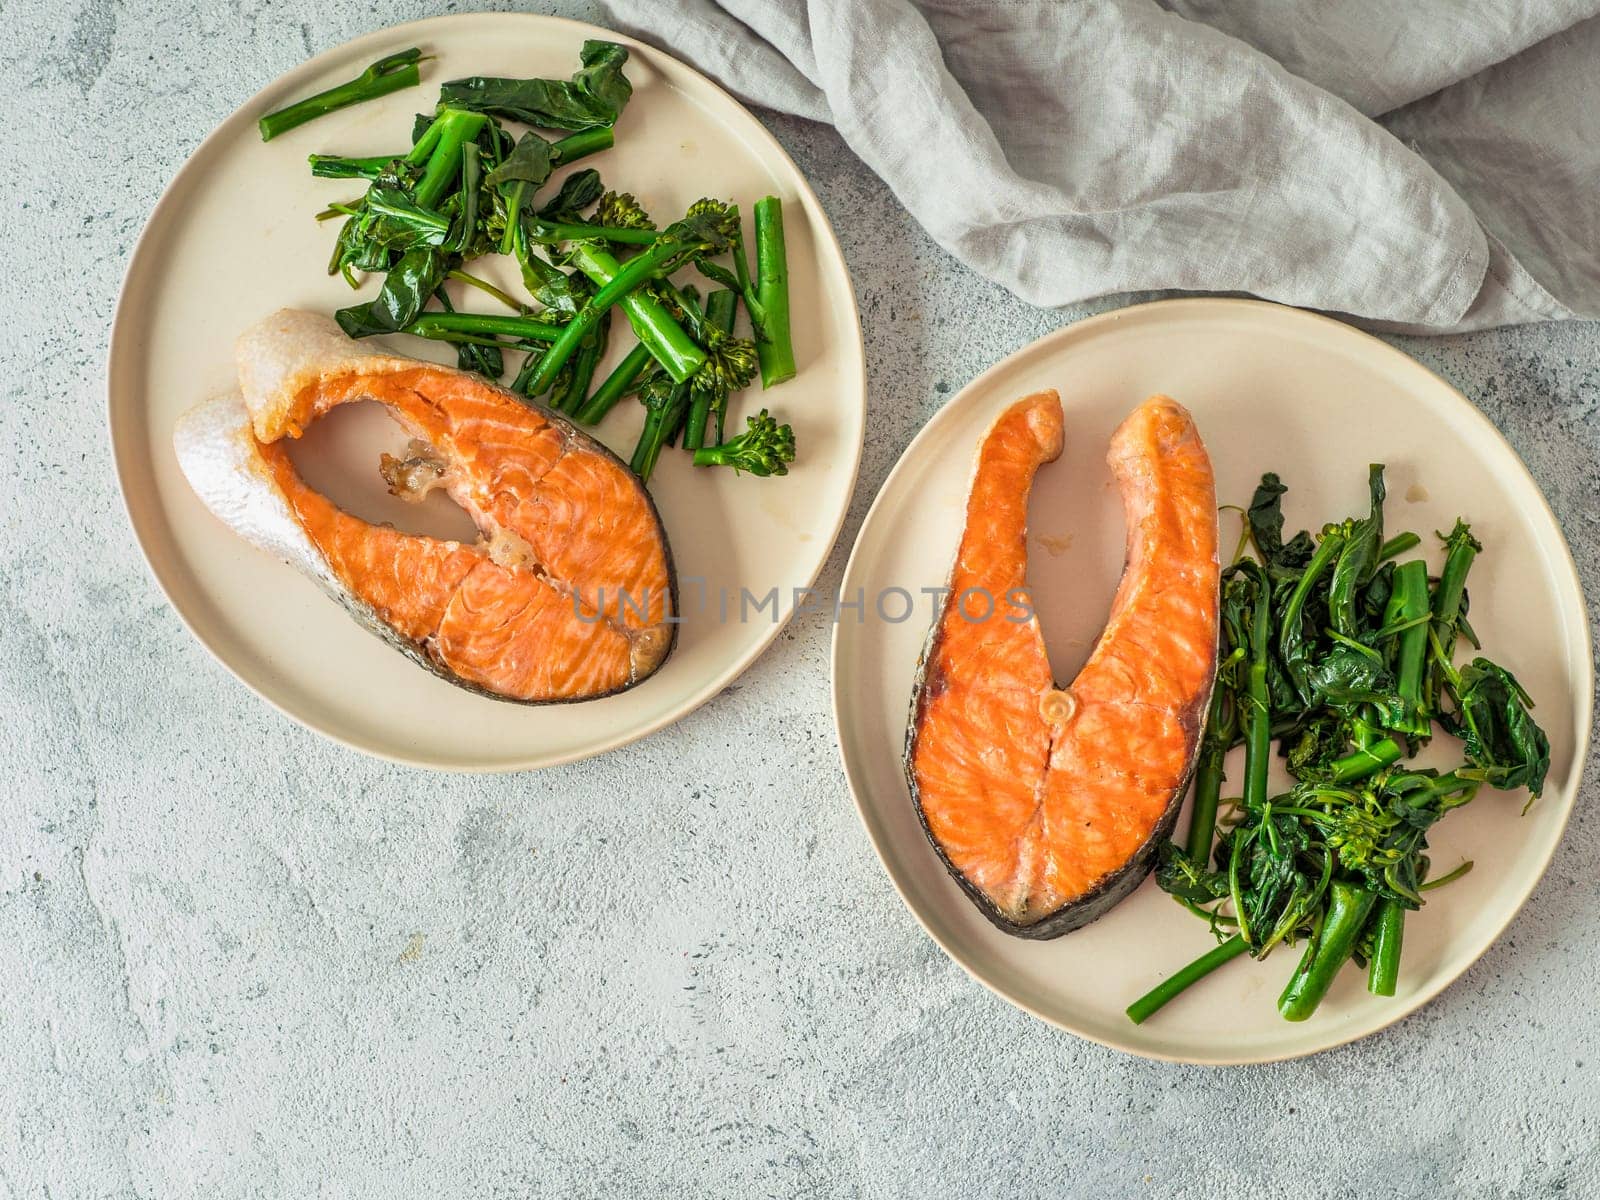 Ready-to-eat grilled salmon steak and greens - baby broccoli or broccolini and spinach on rustic craft plate over gray background. Keto diet dish. Top view or flat lay. Copy space for text or design.